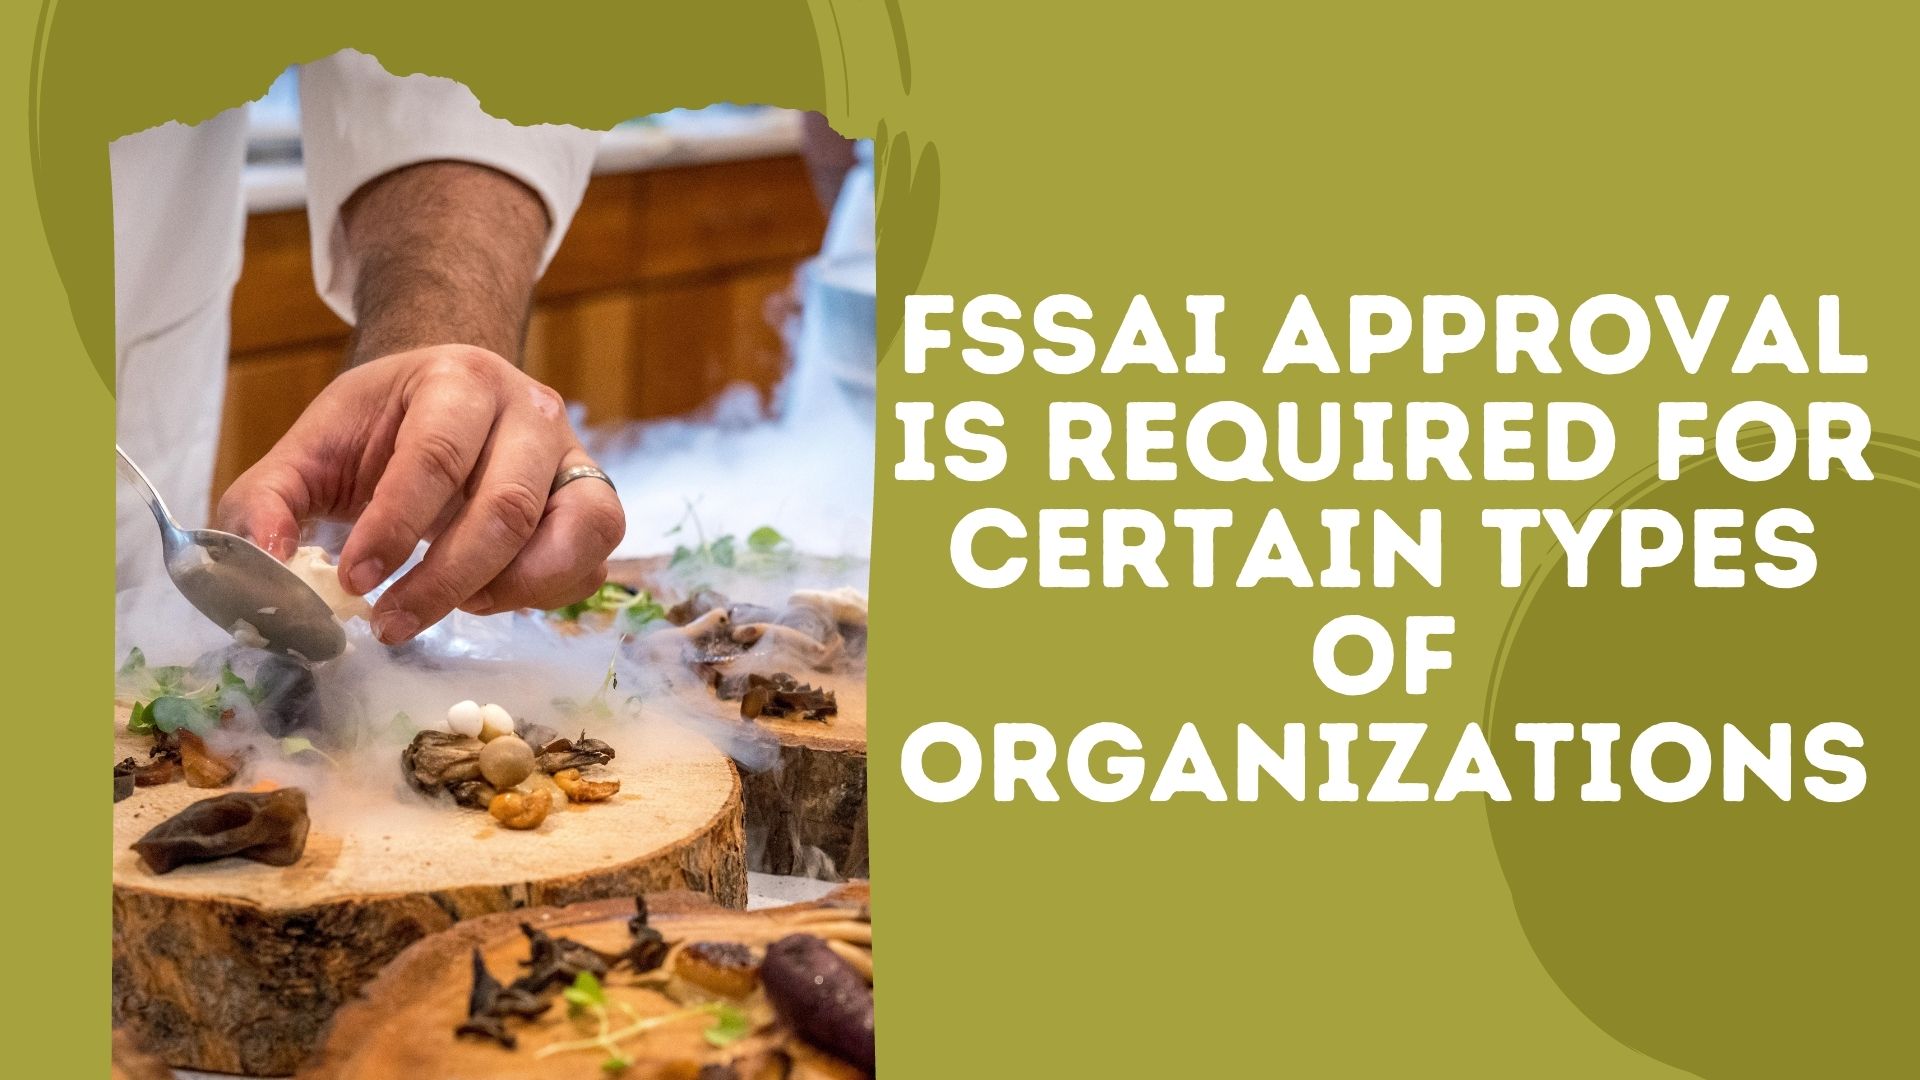 FSSAI approval is required for certain types of organizations